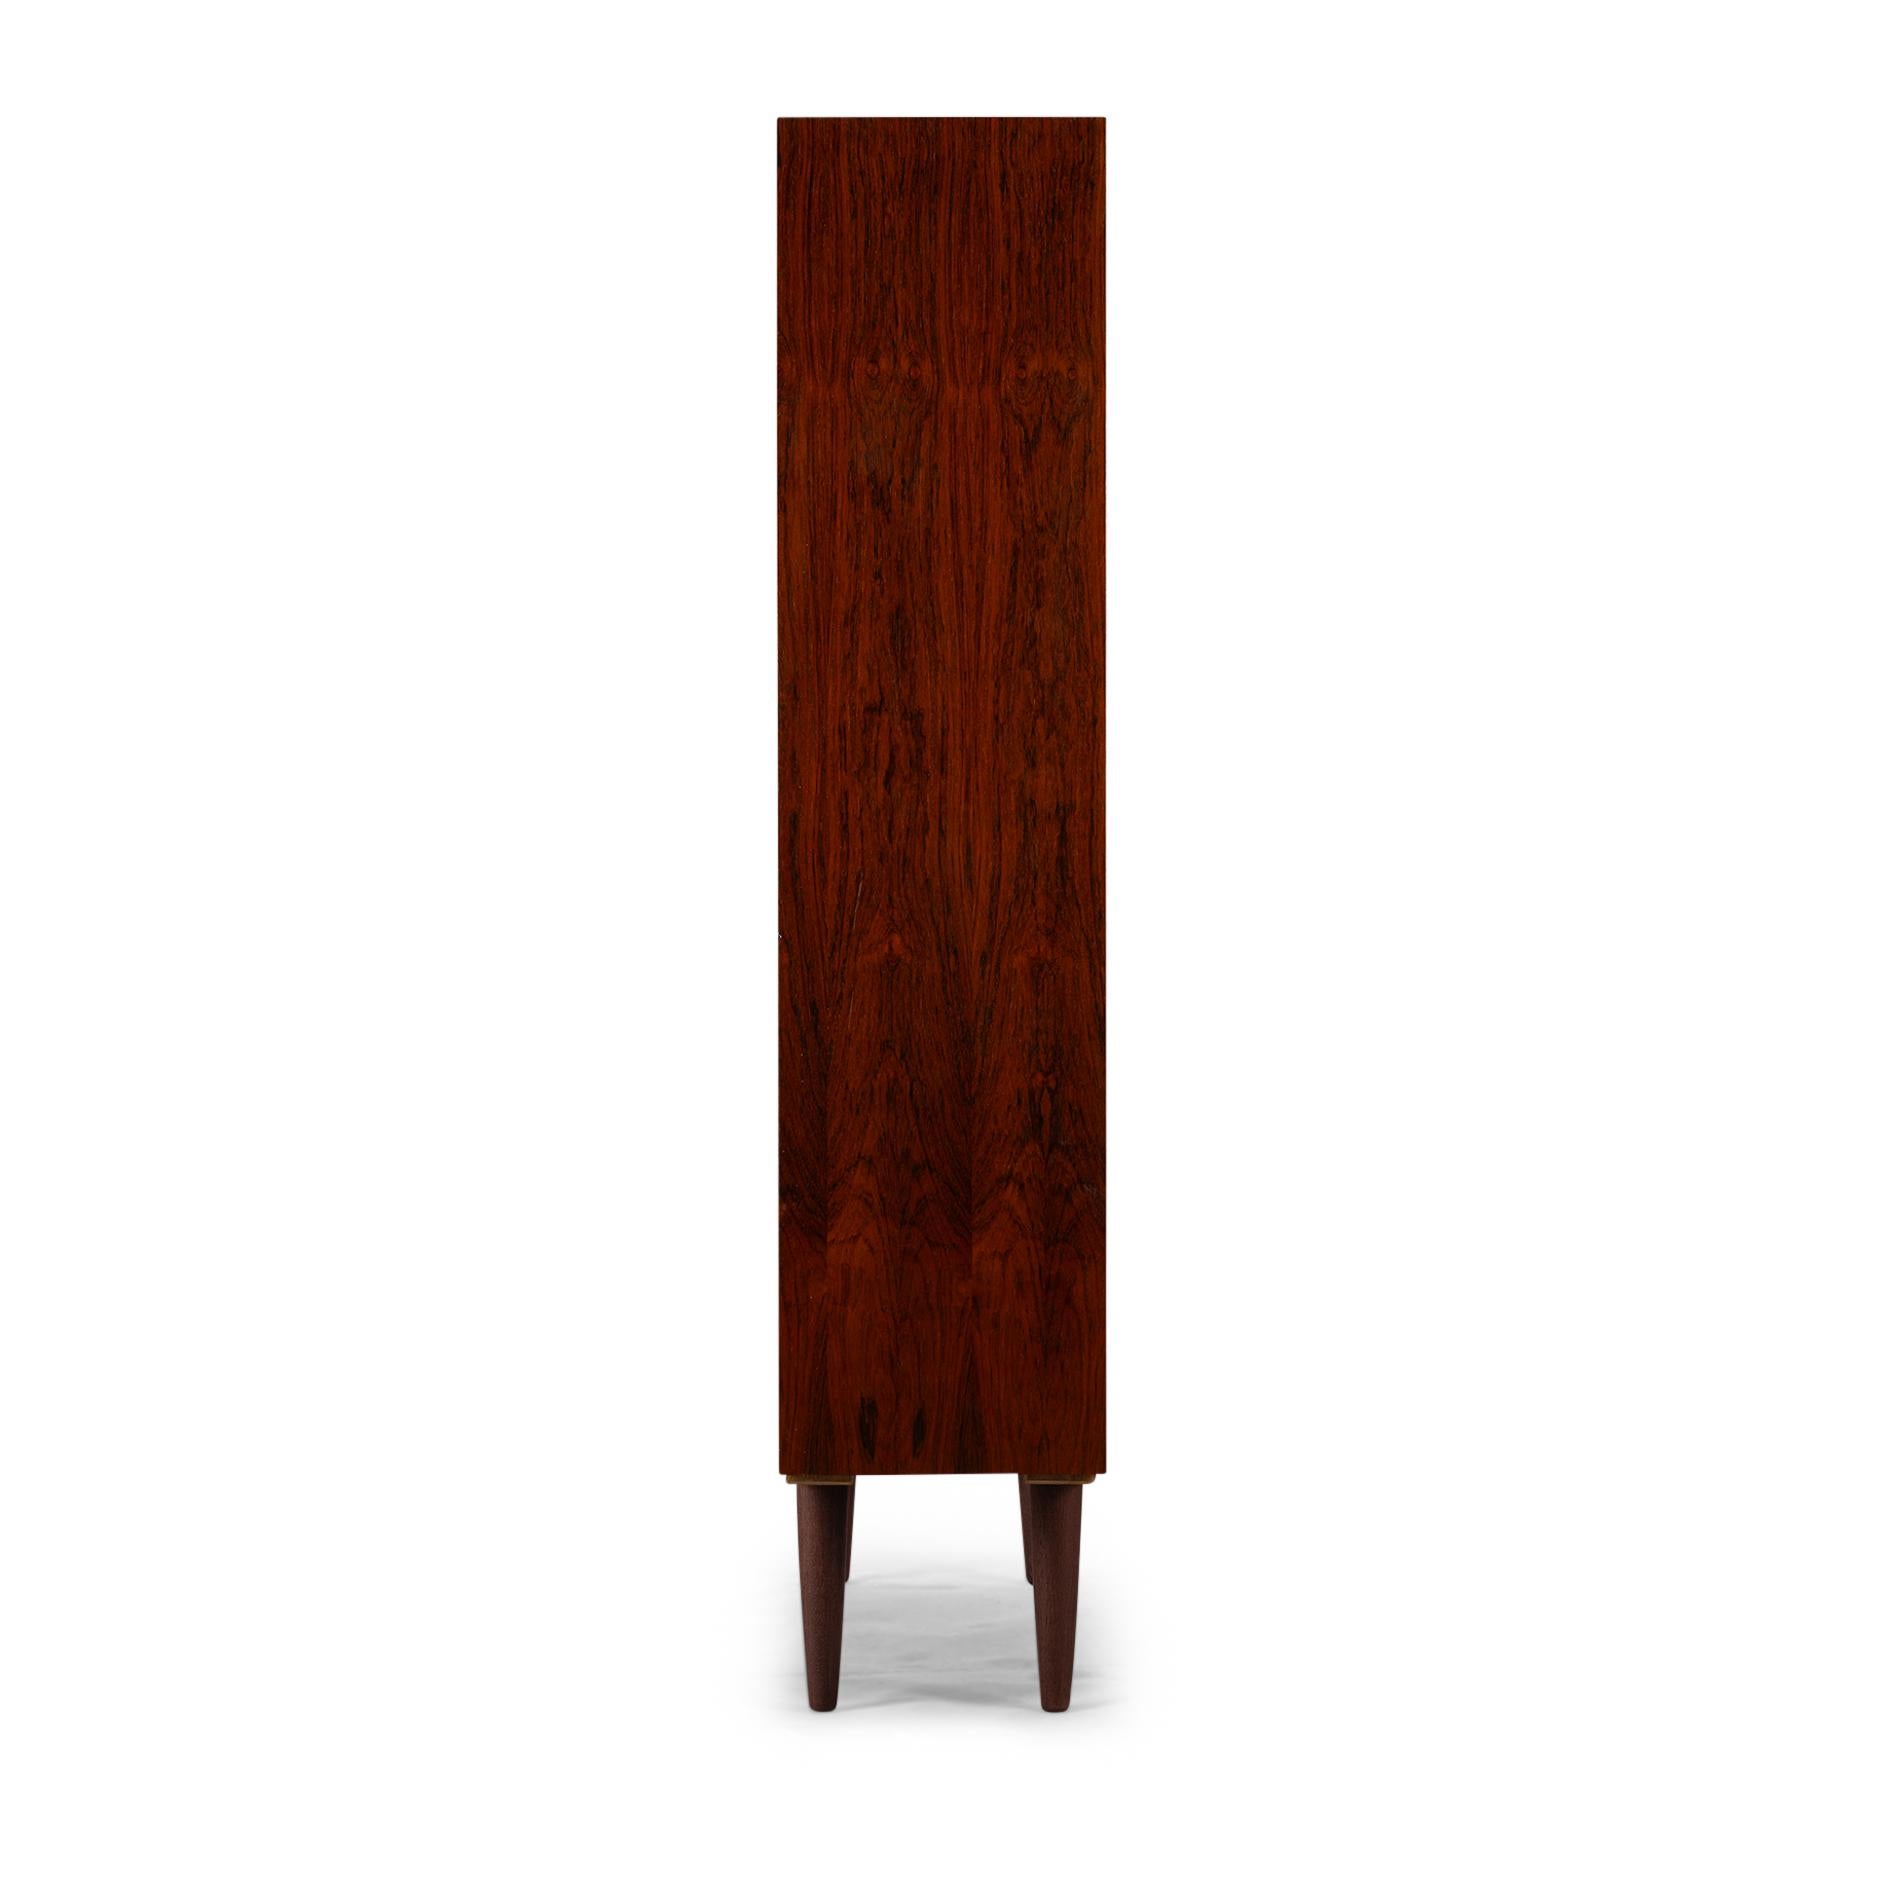 Danish Design
Introducing the Omann Jun Model 6 bookcase in rosewood. The Omann Jun Model 6 Bookcase proudly carries forward the legacy of Danish design, renowned for its clean lines, minimalist aesthetics, and exceptional craftsmanship. Inspired by